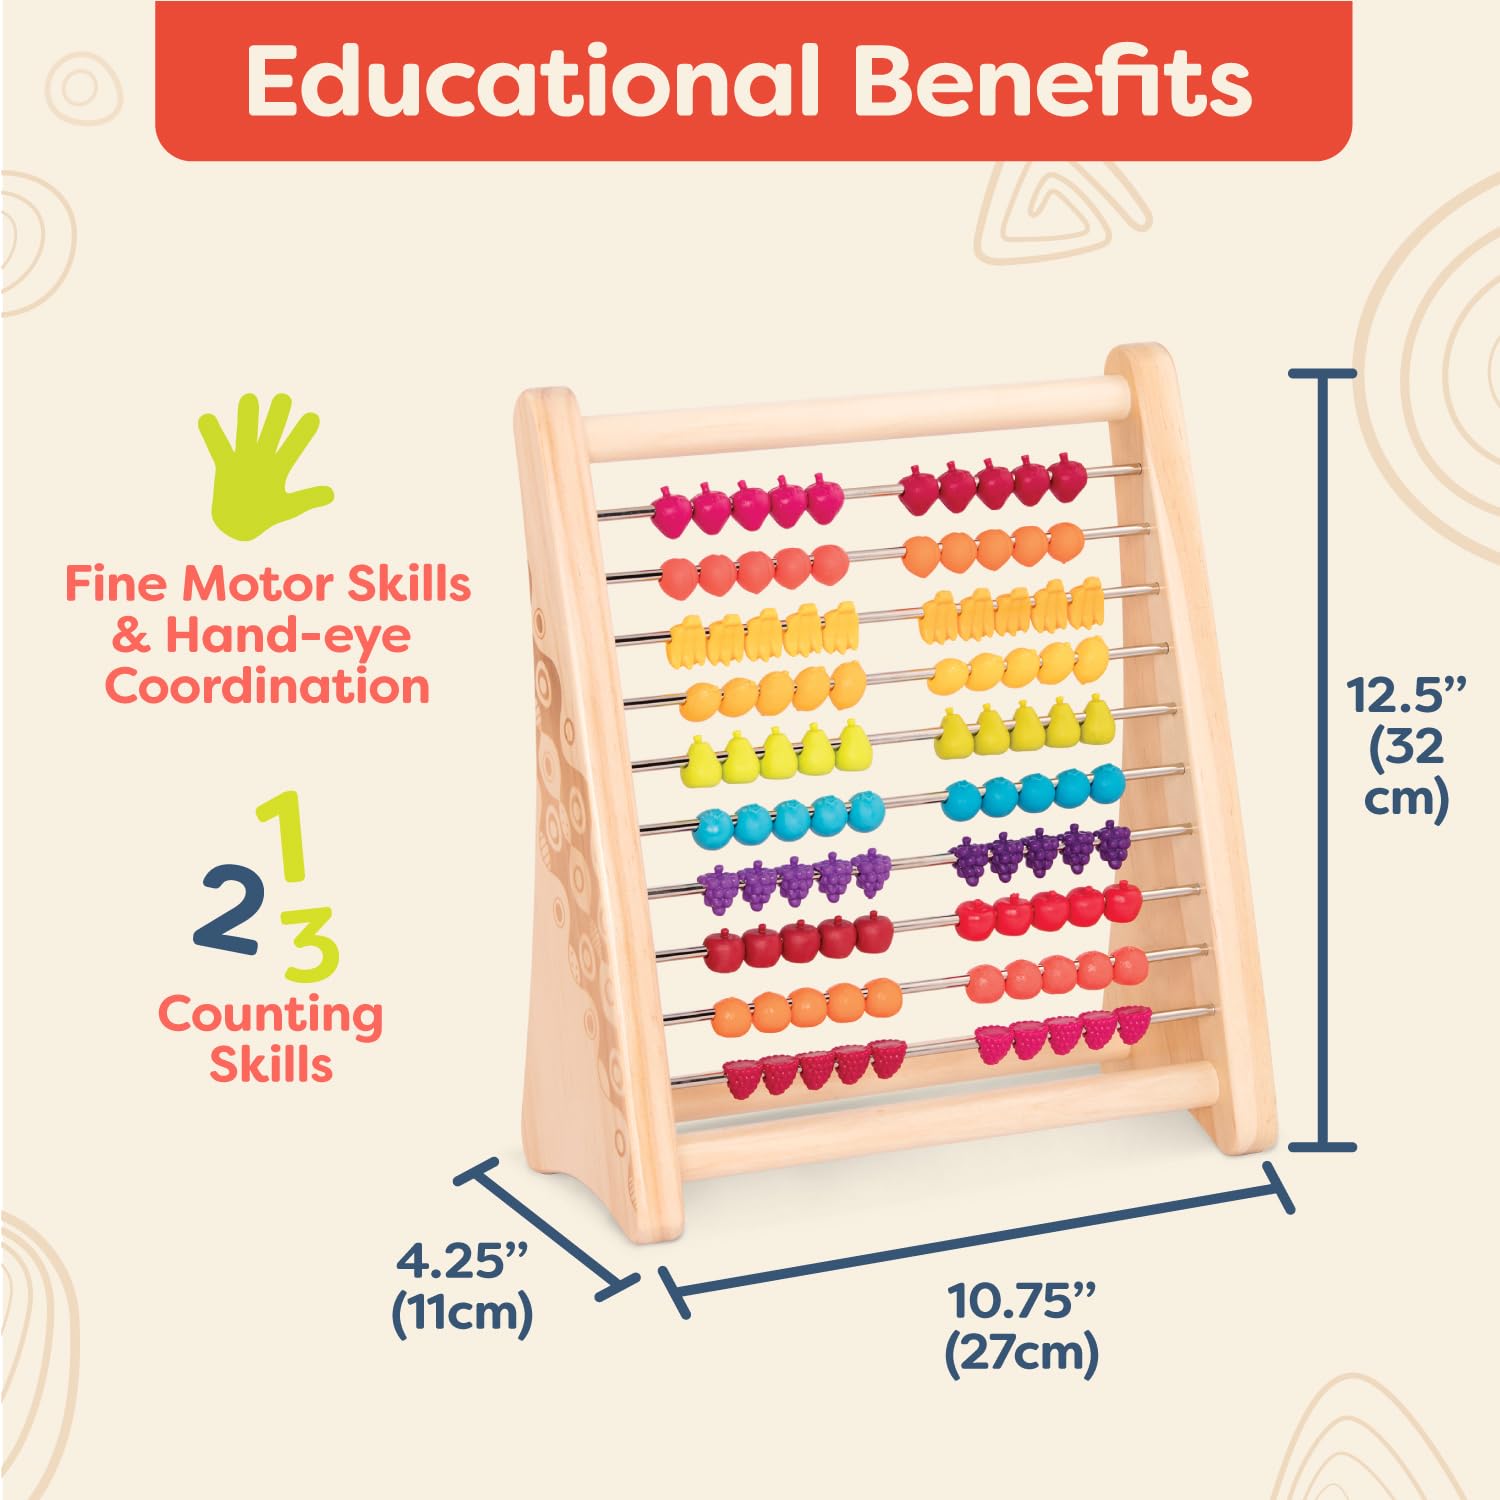 B. – Wooden Abacus for Kids – Classic Math Toy with 100 Beads – Educational Toy for Addition and Subtraction – Numbers & Counting – 18 Months + – Two-Ty Fruity!